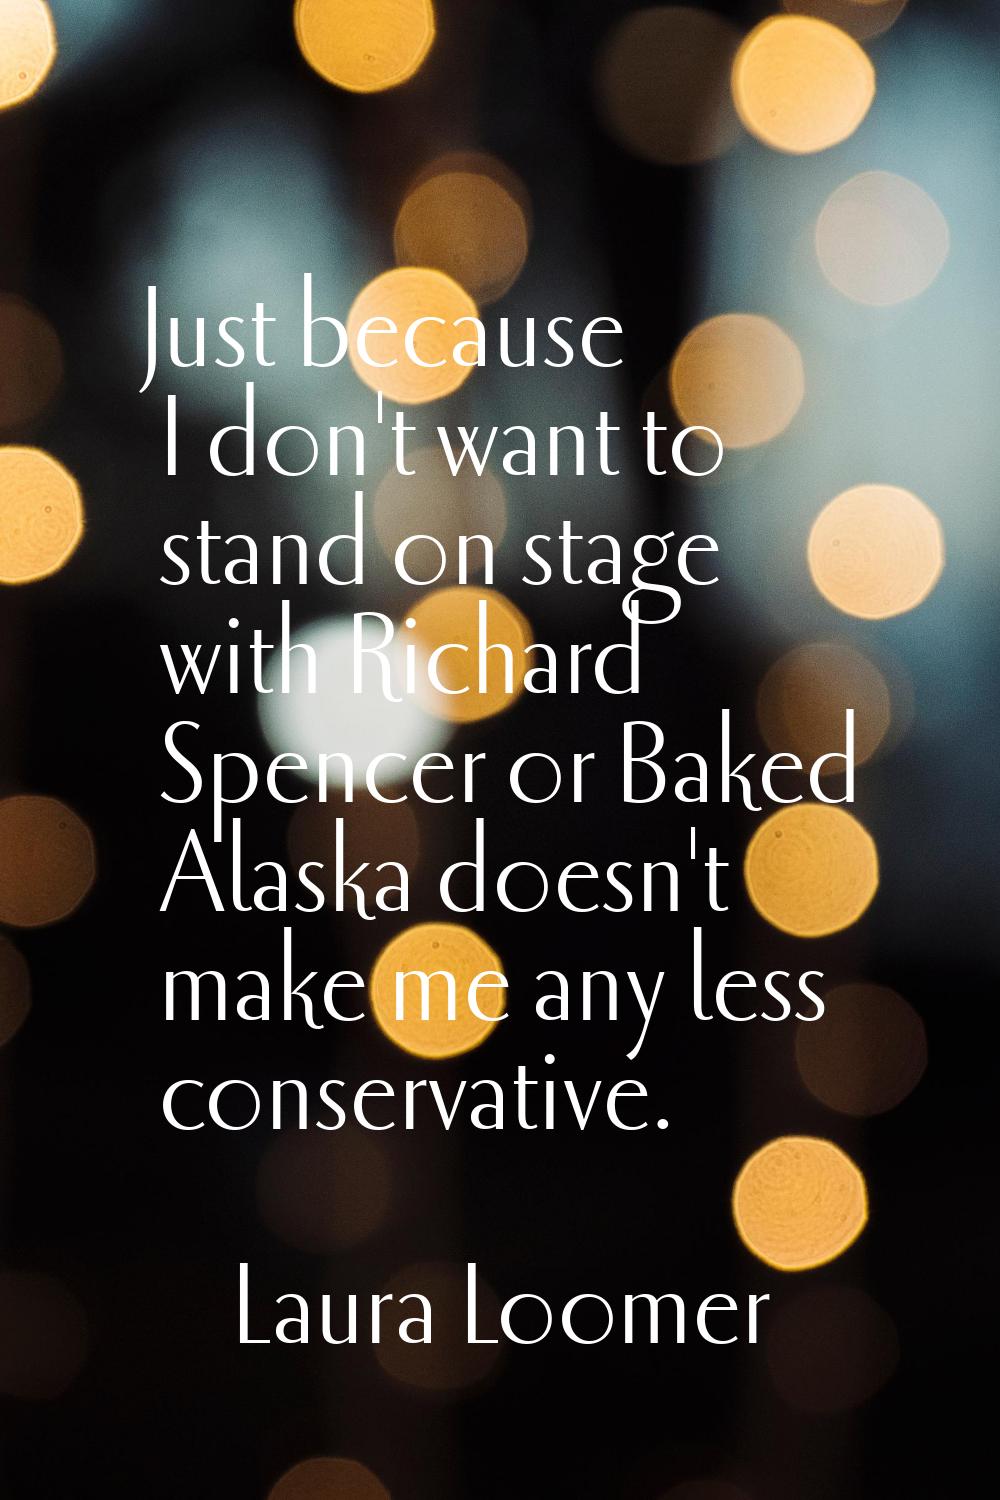 Just because I don't want to stand on stage with Richard Spencer or Baked Alaska doesn't make me an